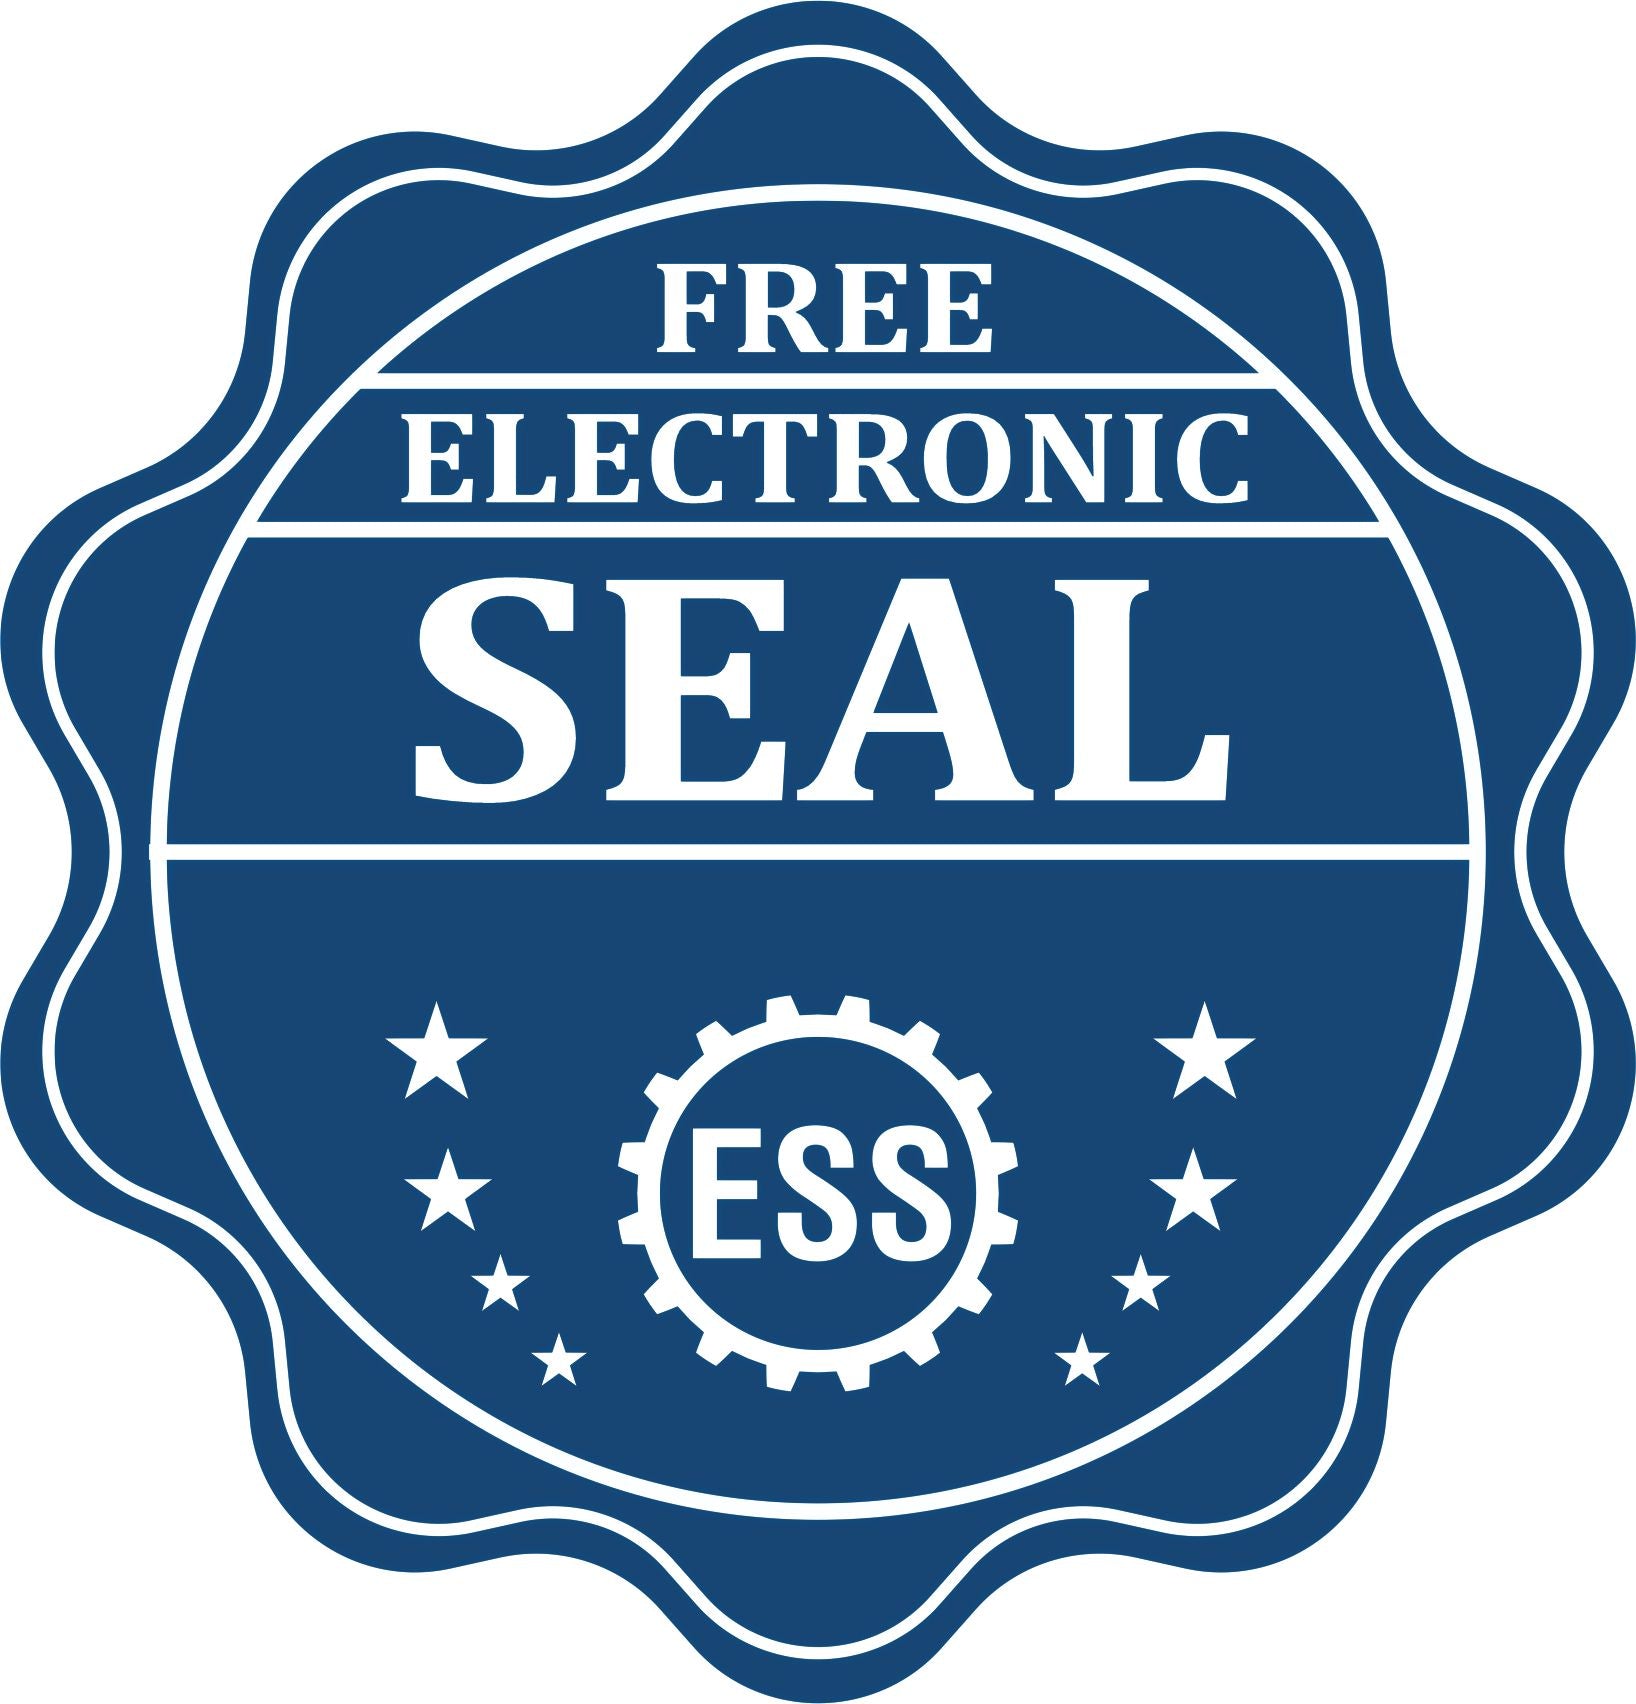 A badge showing a free electronic seal for the Gift Arizona Architect Seal with stars and the ESS gear on the emblem.